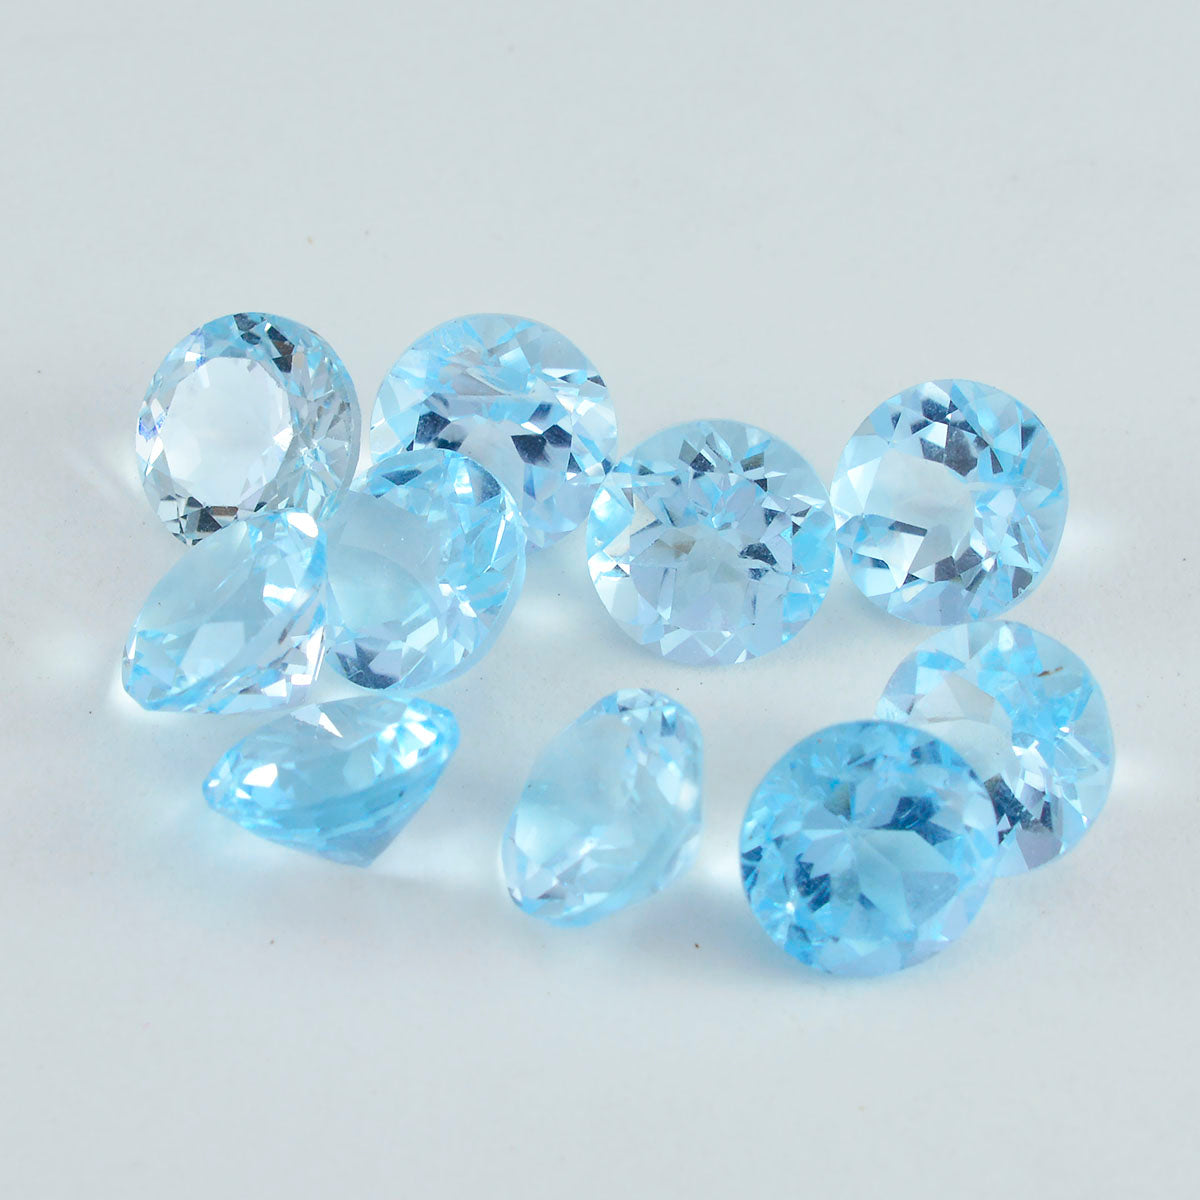 Riyogems 1PC Real Blue Topaz Faceted 5x5 mm Round Shape superb Quality Loose Stone